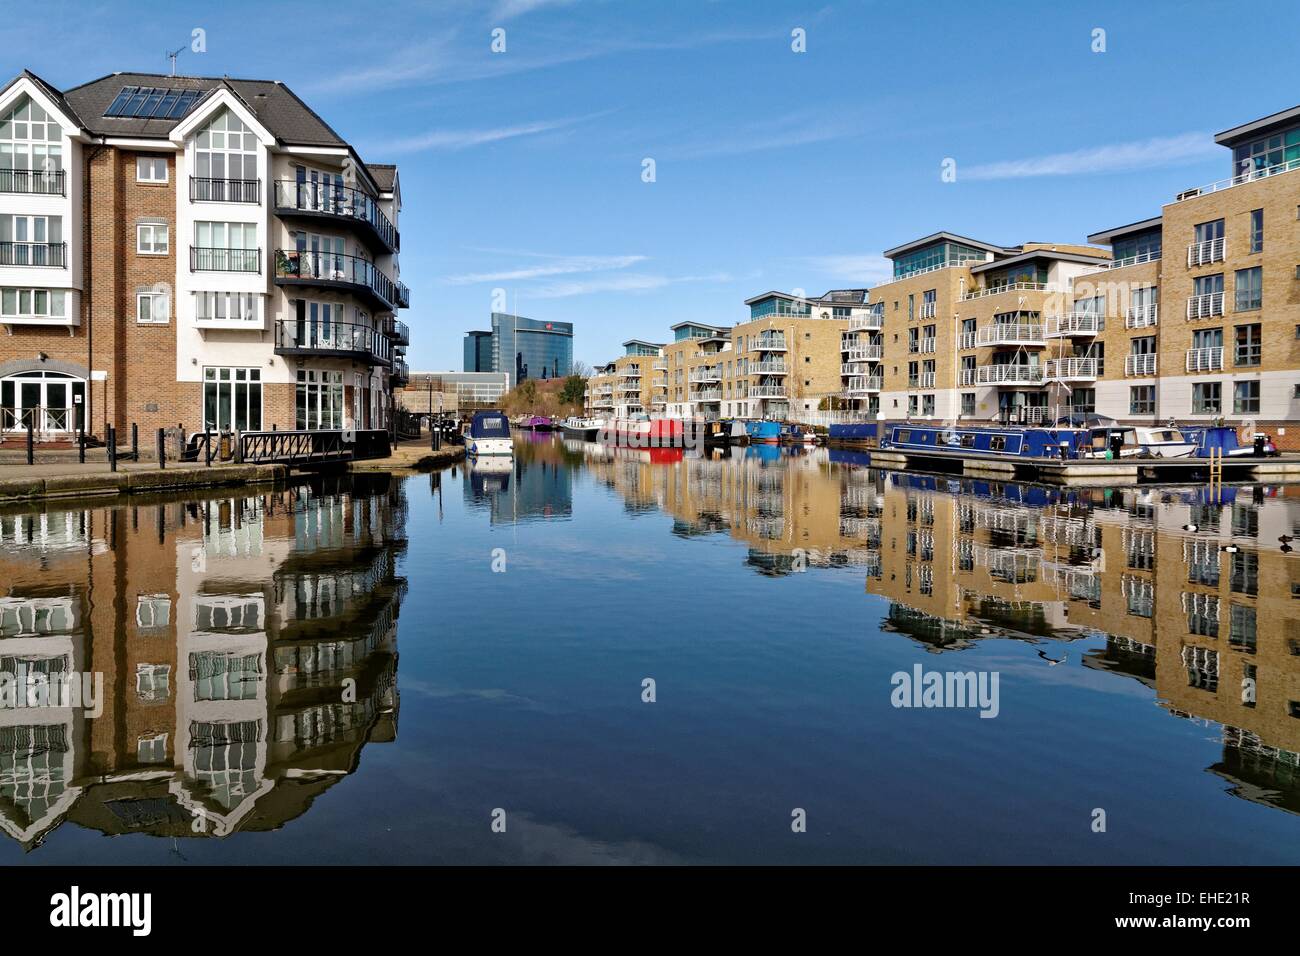 Modern housing on the Grand Union canal at Brentford lock west London UK Stock Photo